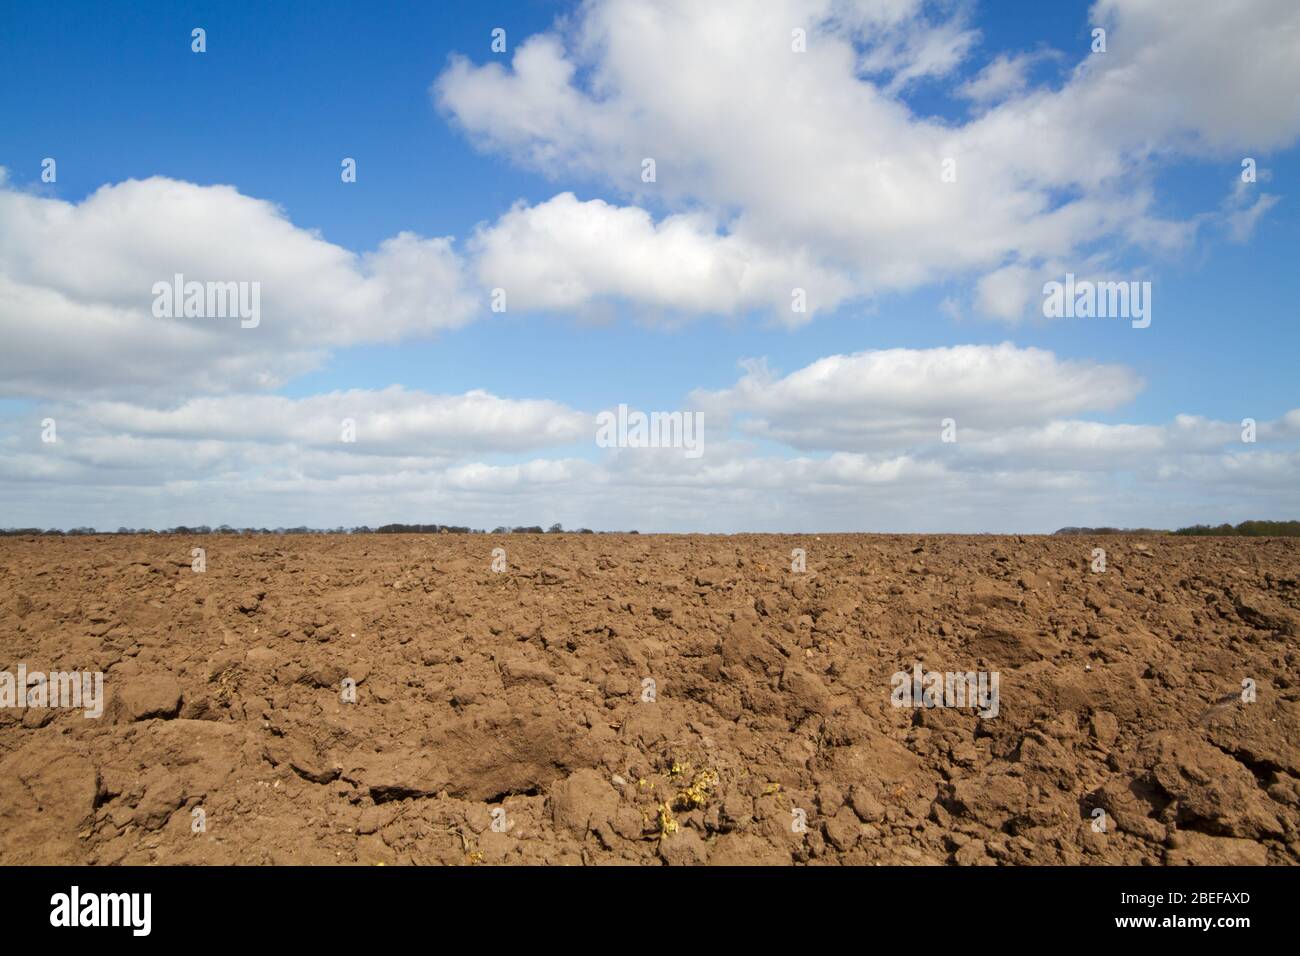 Fertile brown humic soil, prepared for sowing or planting, under a blue sky with white clouds Stock Photo